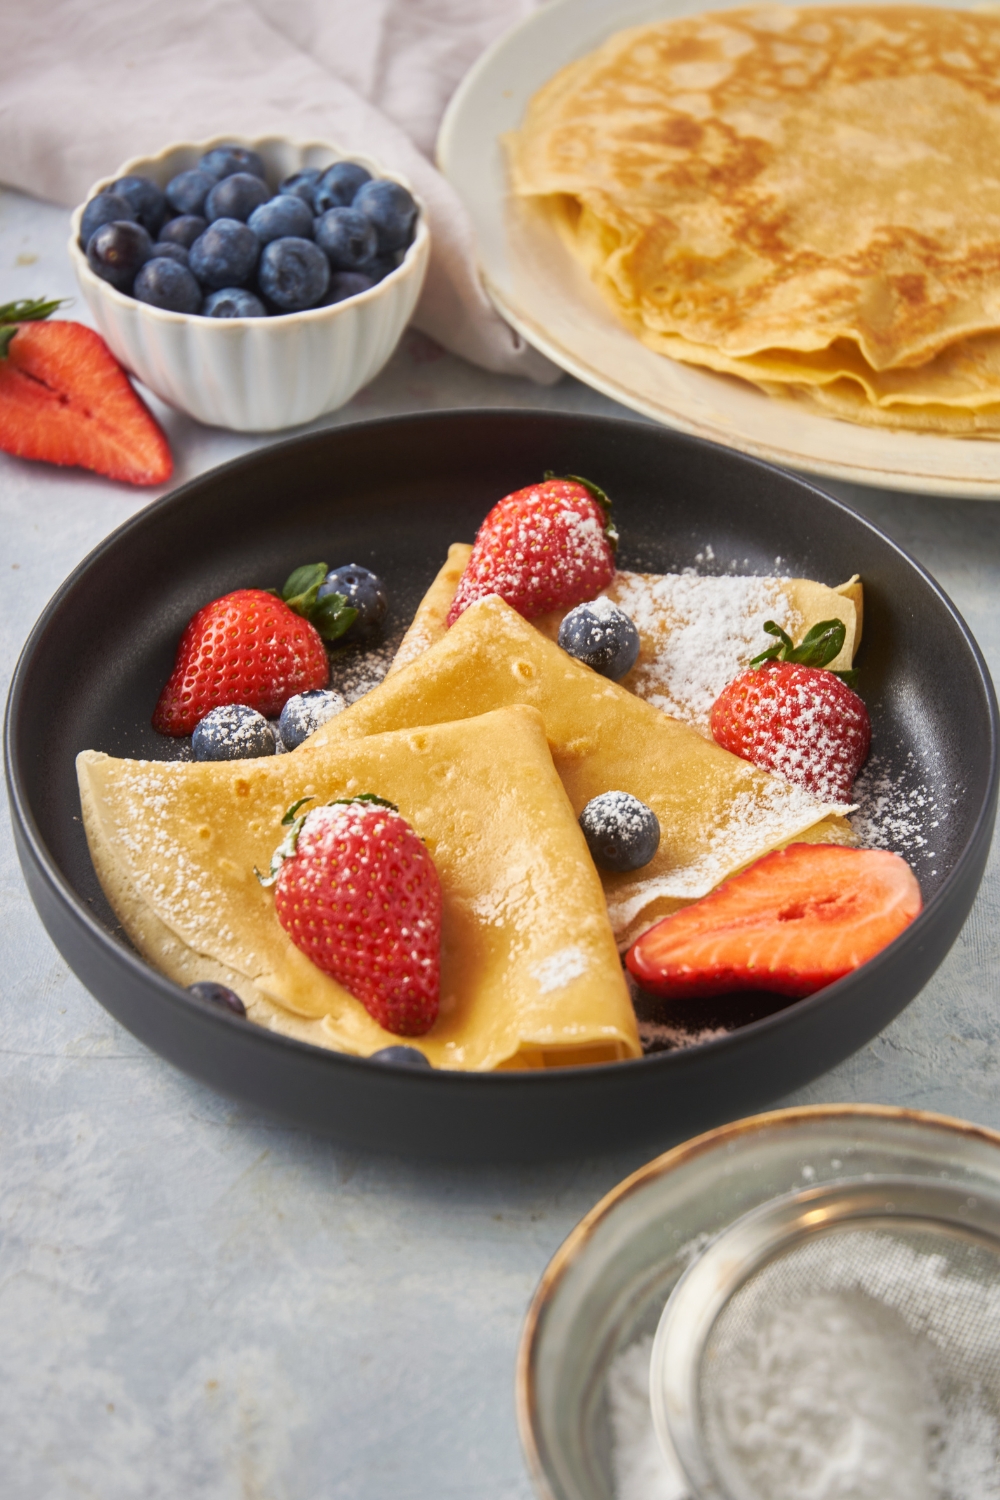 Three crepes layered on top of each other, dusted with powdered sugar and topped with fresh blueberries and halved strawberries.